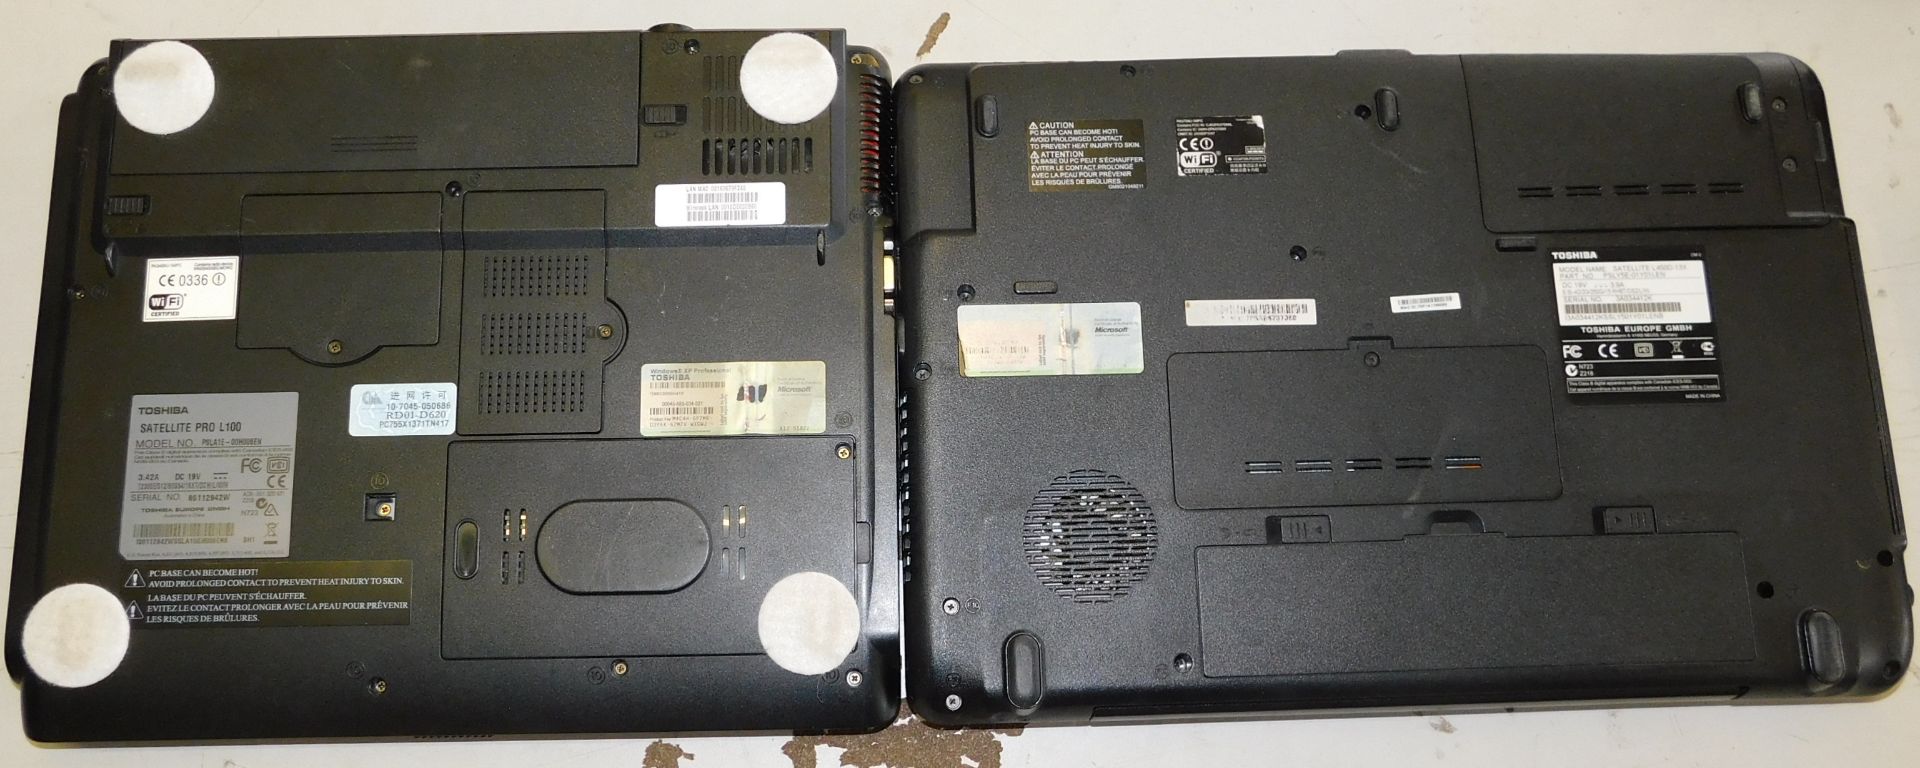 2 Toshiba Laptops (No PSU’s) (No HDDs) (One Damaged)  (Location Stockport. Please Refer to General - Image 2 of 2